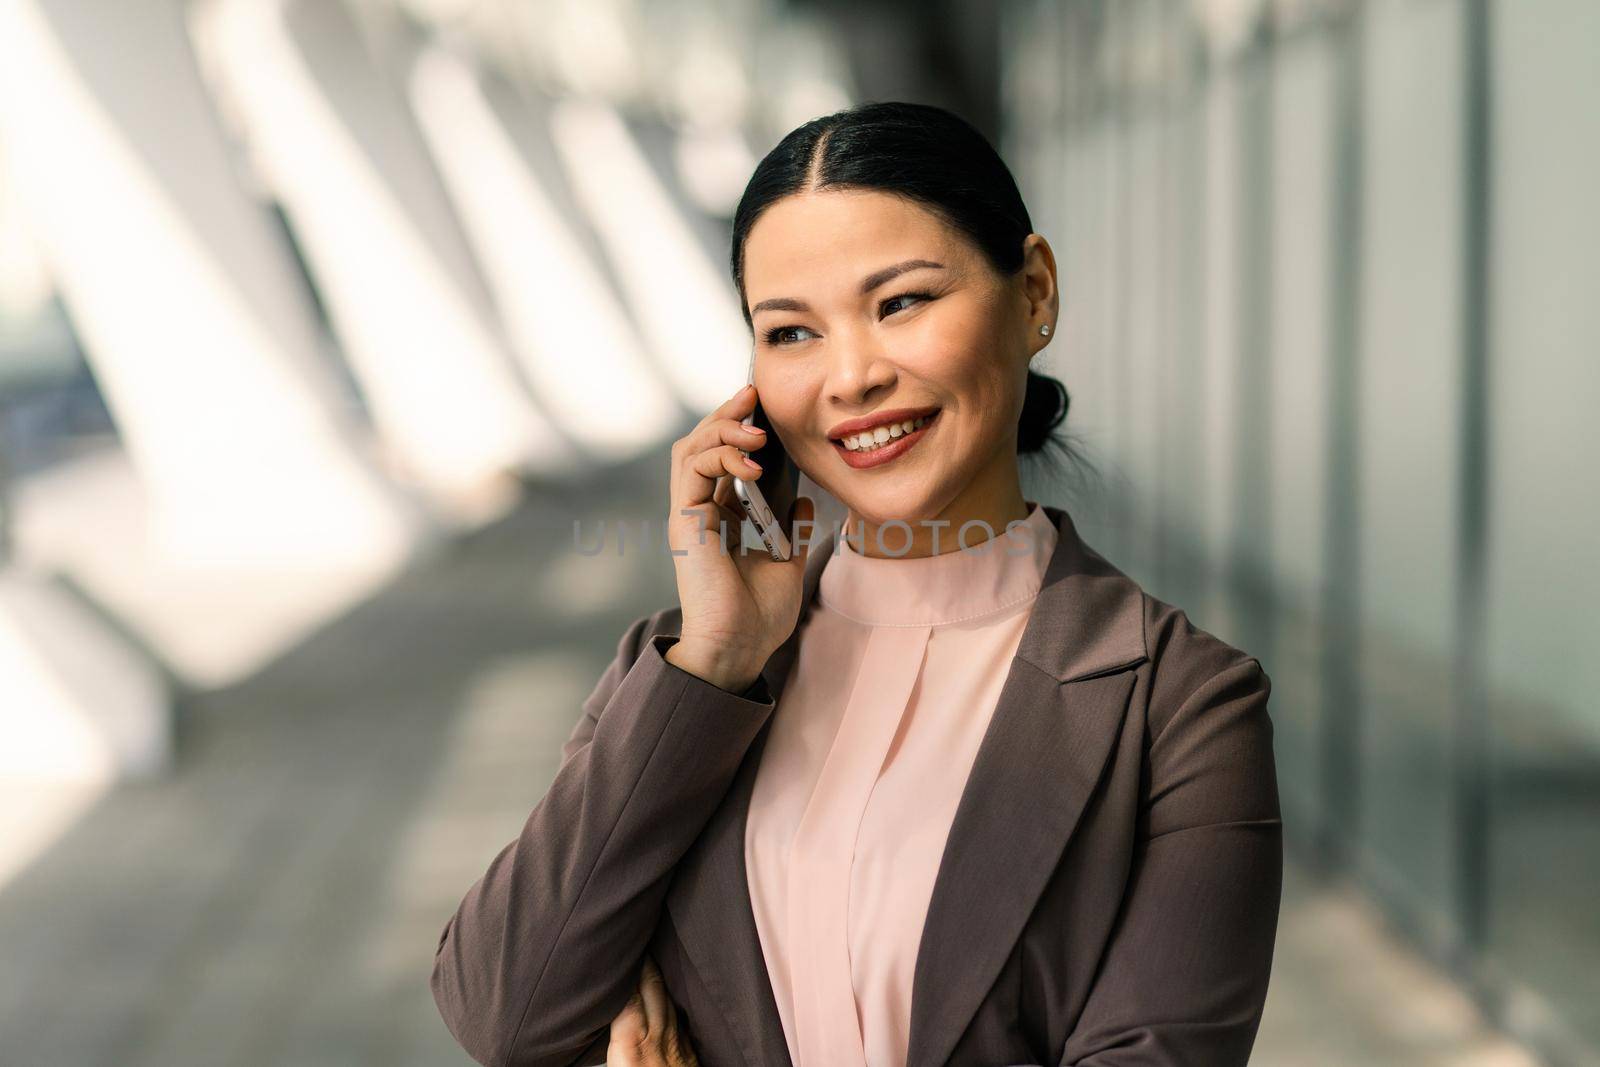 Smiling Asian businesswoman in suit talking on mobile phone against backdrop of business center. High quality photo by LipikStockMedia